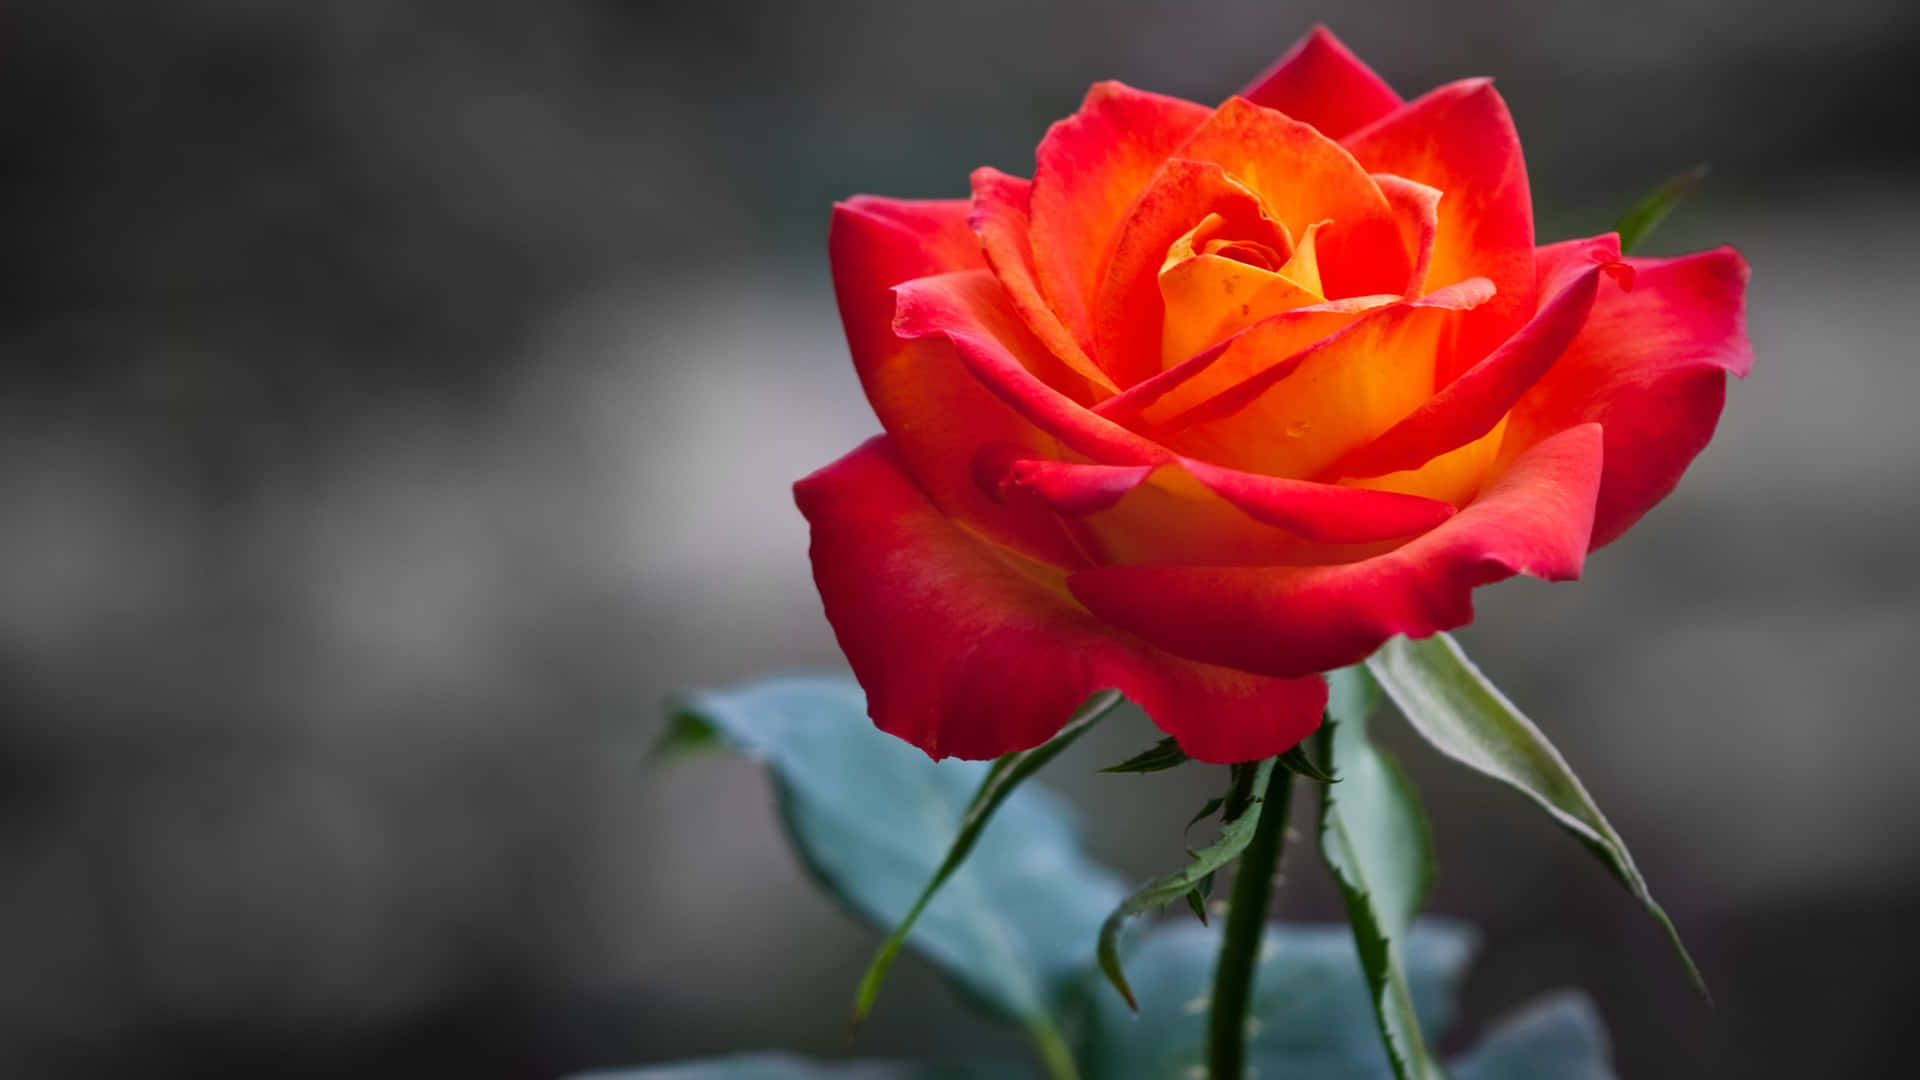 A Beautiful, Vibrant Red Rose Stands Out Against A Shadowy Background. Background